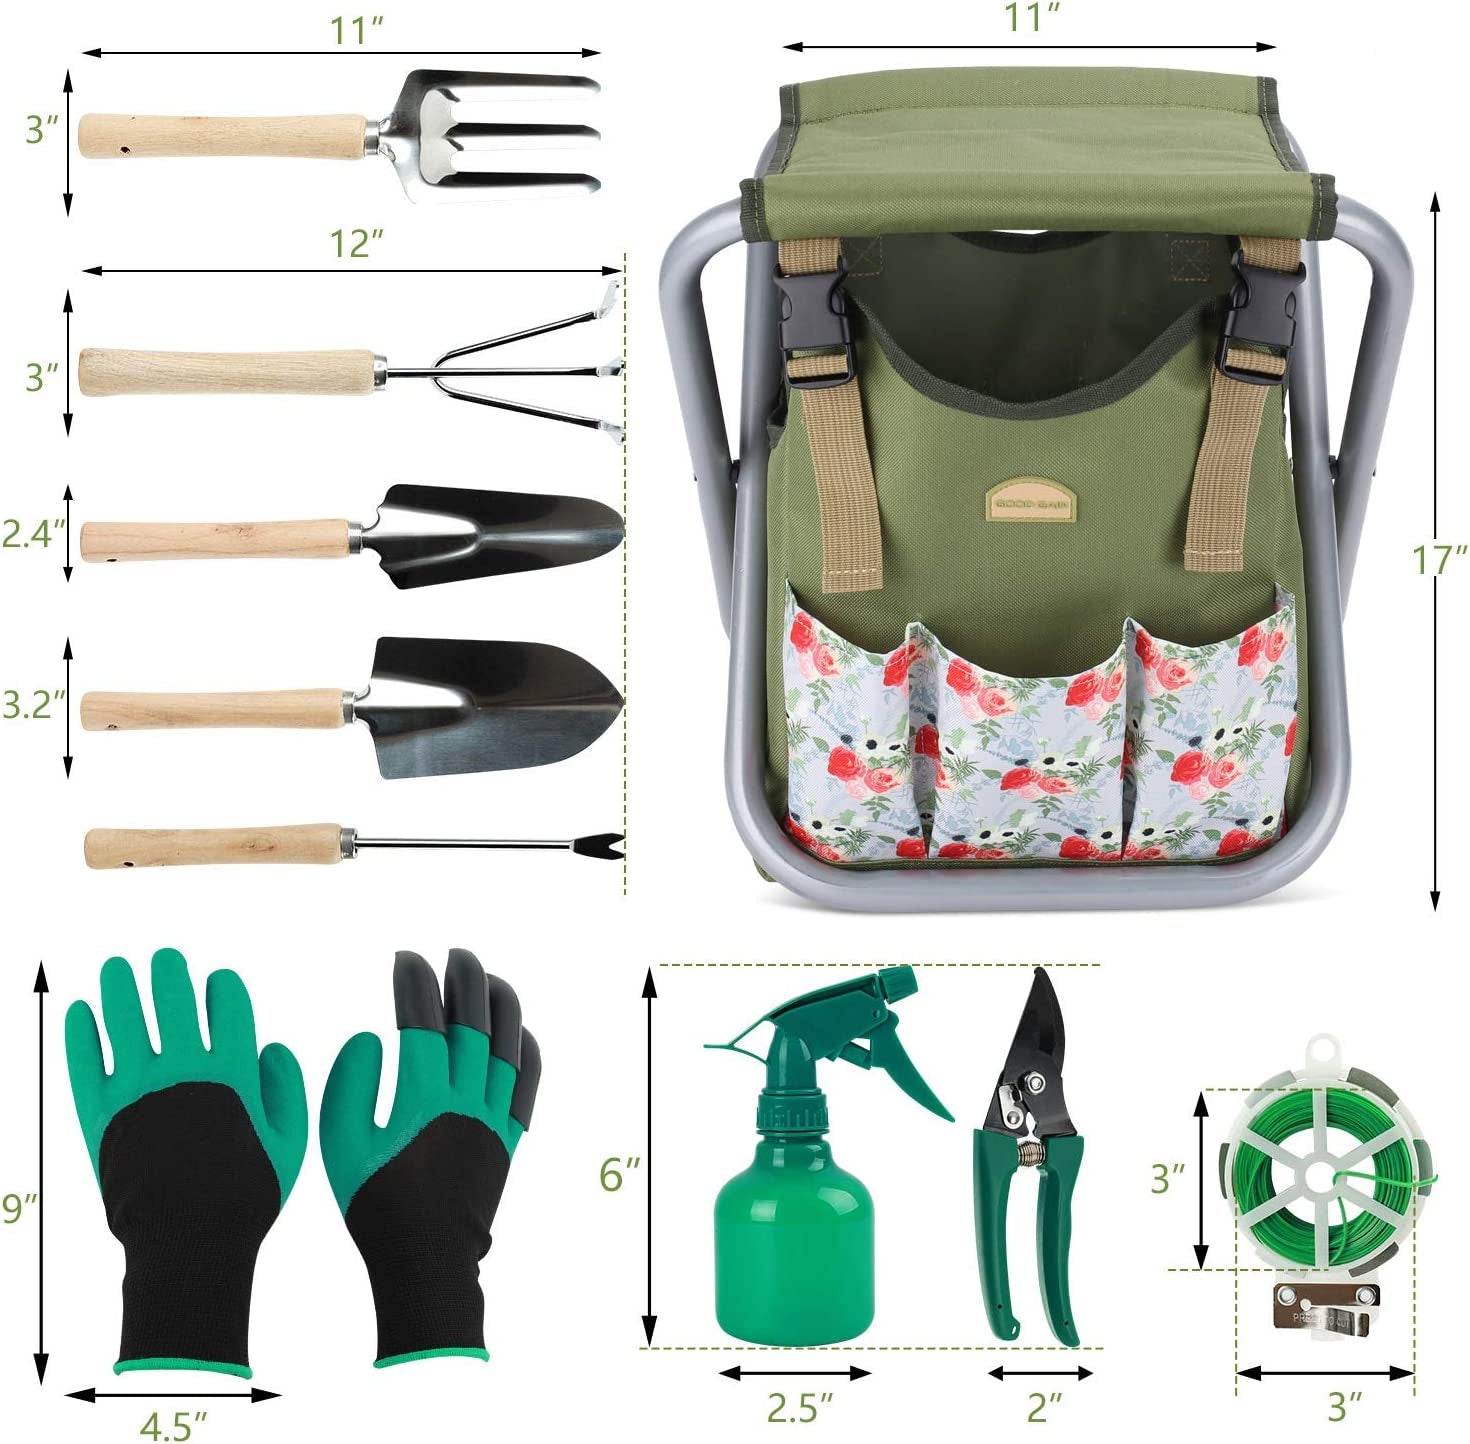 G GOOD GAIN, Good GAIN Garden Tools Stool, 12 Pcs Gardening Hand Tools Set with Folding Chair Seat and Garden Storage Tote Bag, Garden Tools Carrier, Digging, Gardening Gifts Set for Mom/Dad and Gardeners. Rose